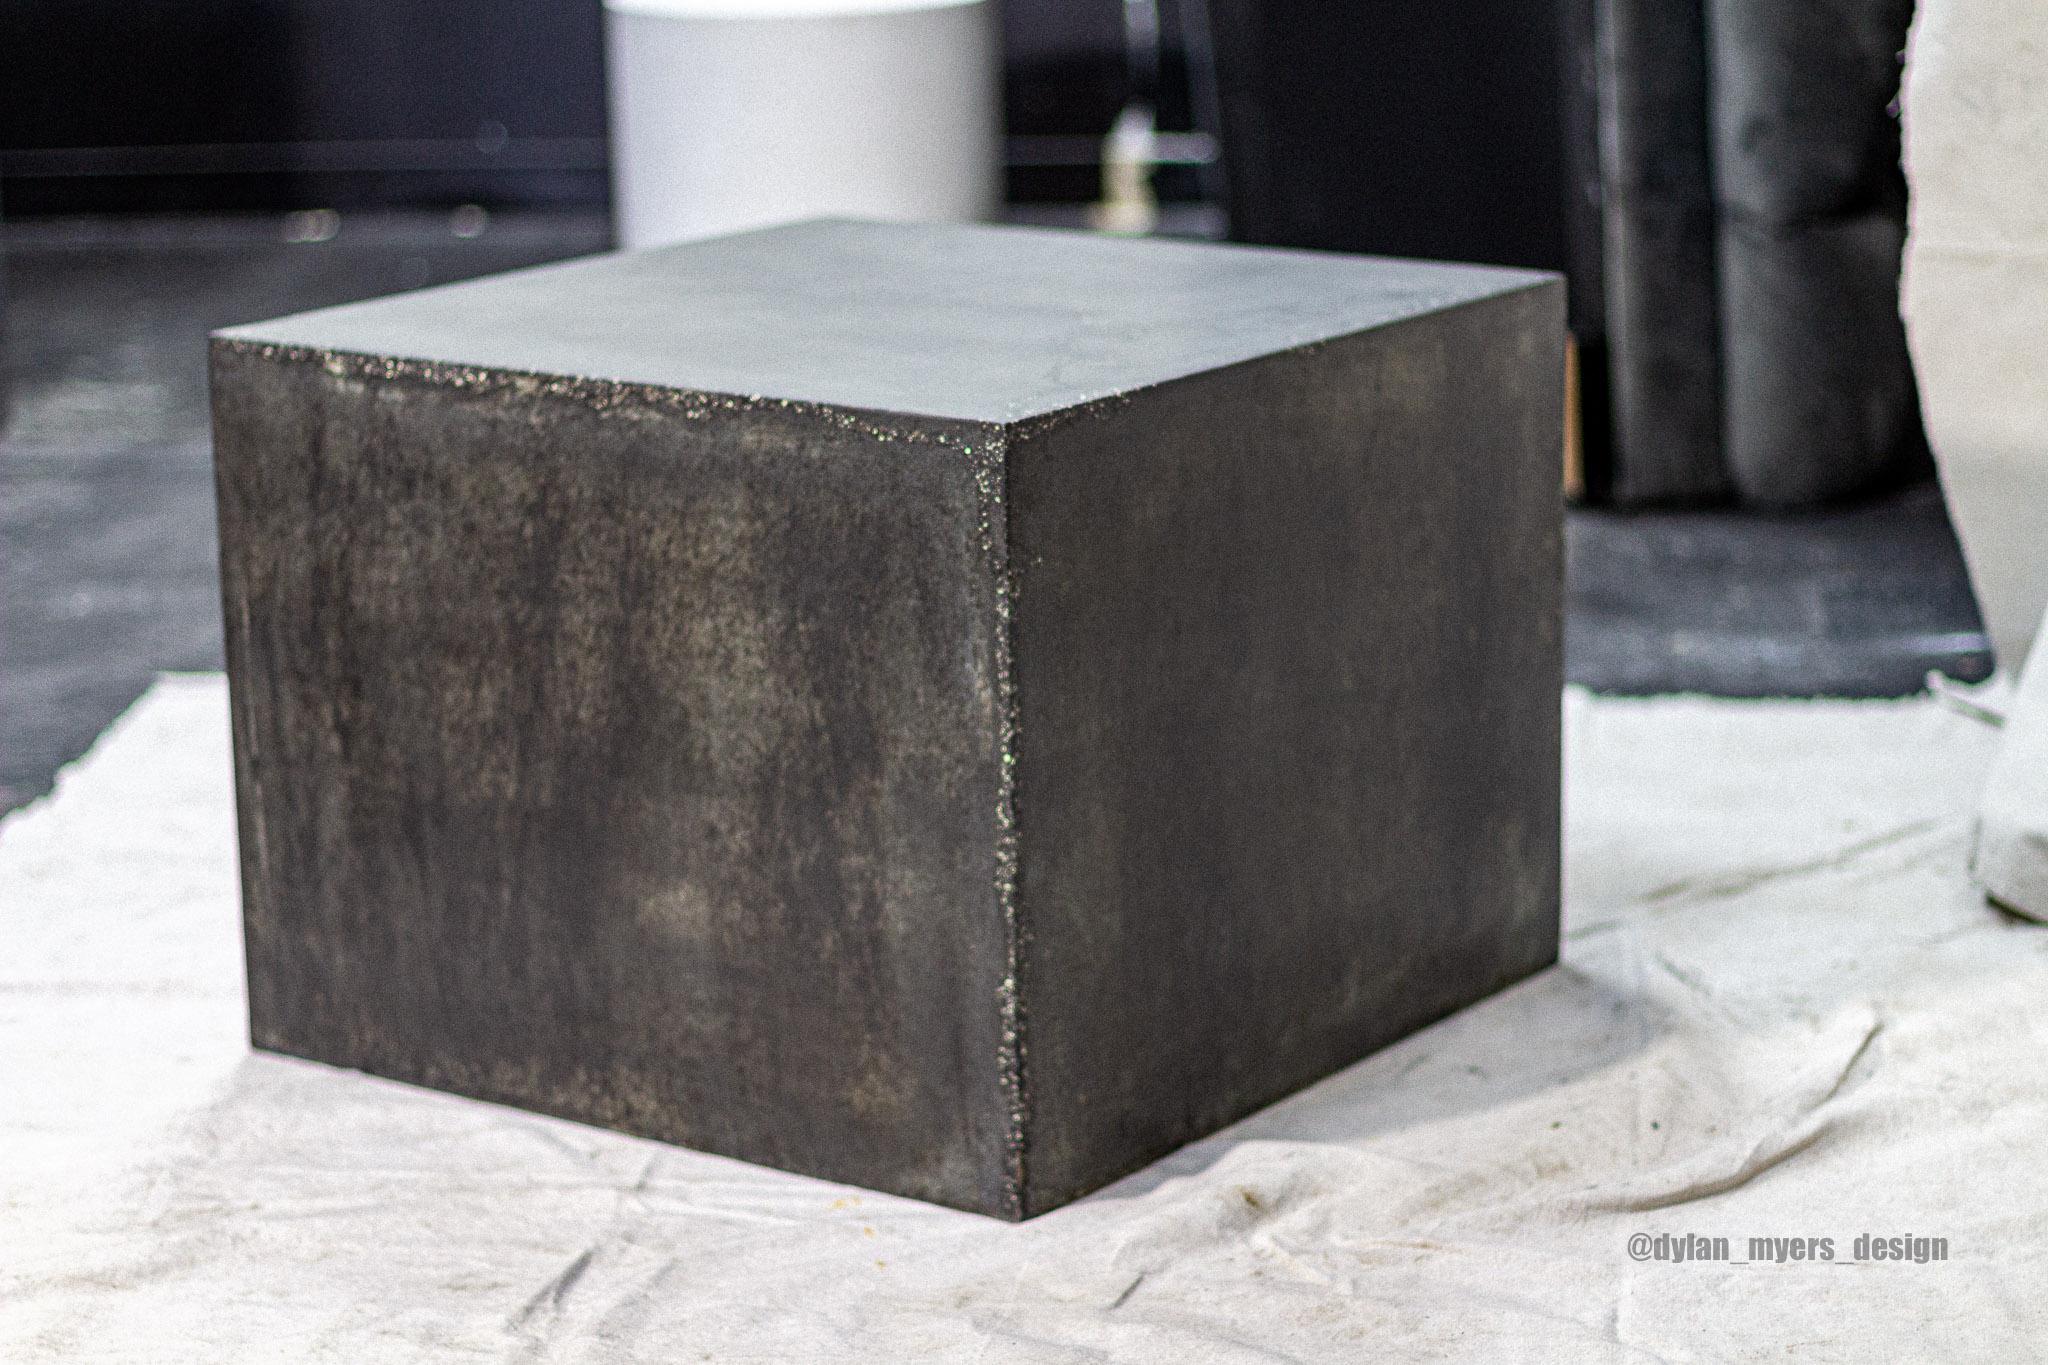 Envisioning a small cube of Black Carborundum with golden veins was Dylans' inspiration for 